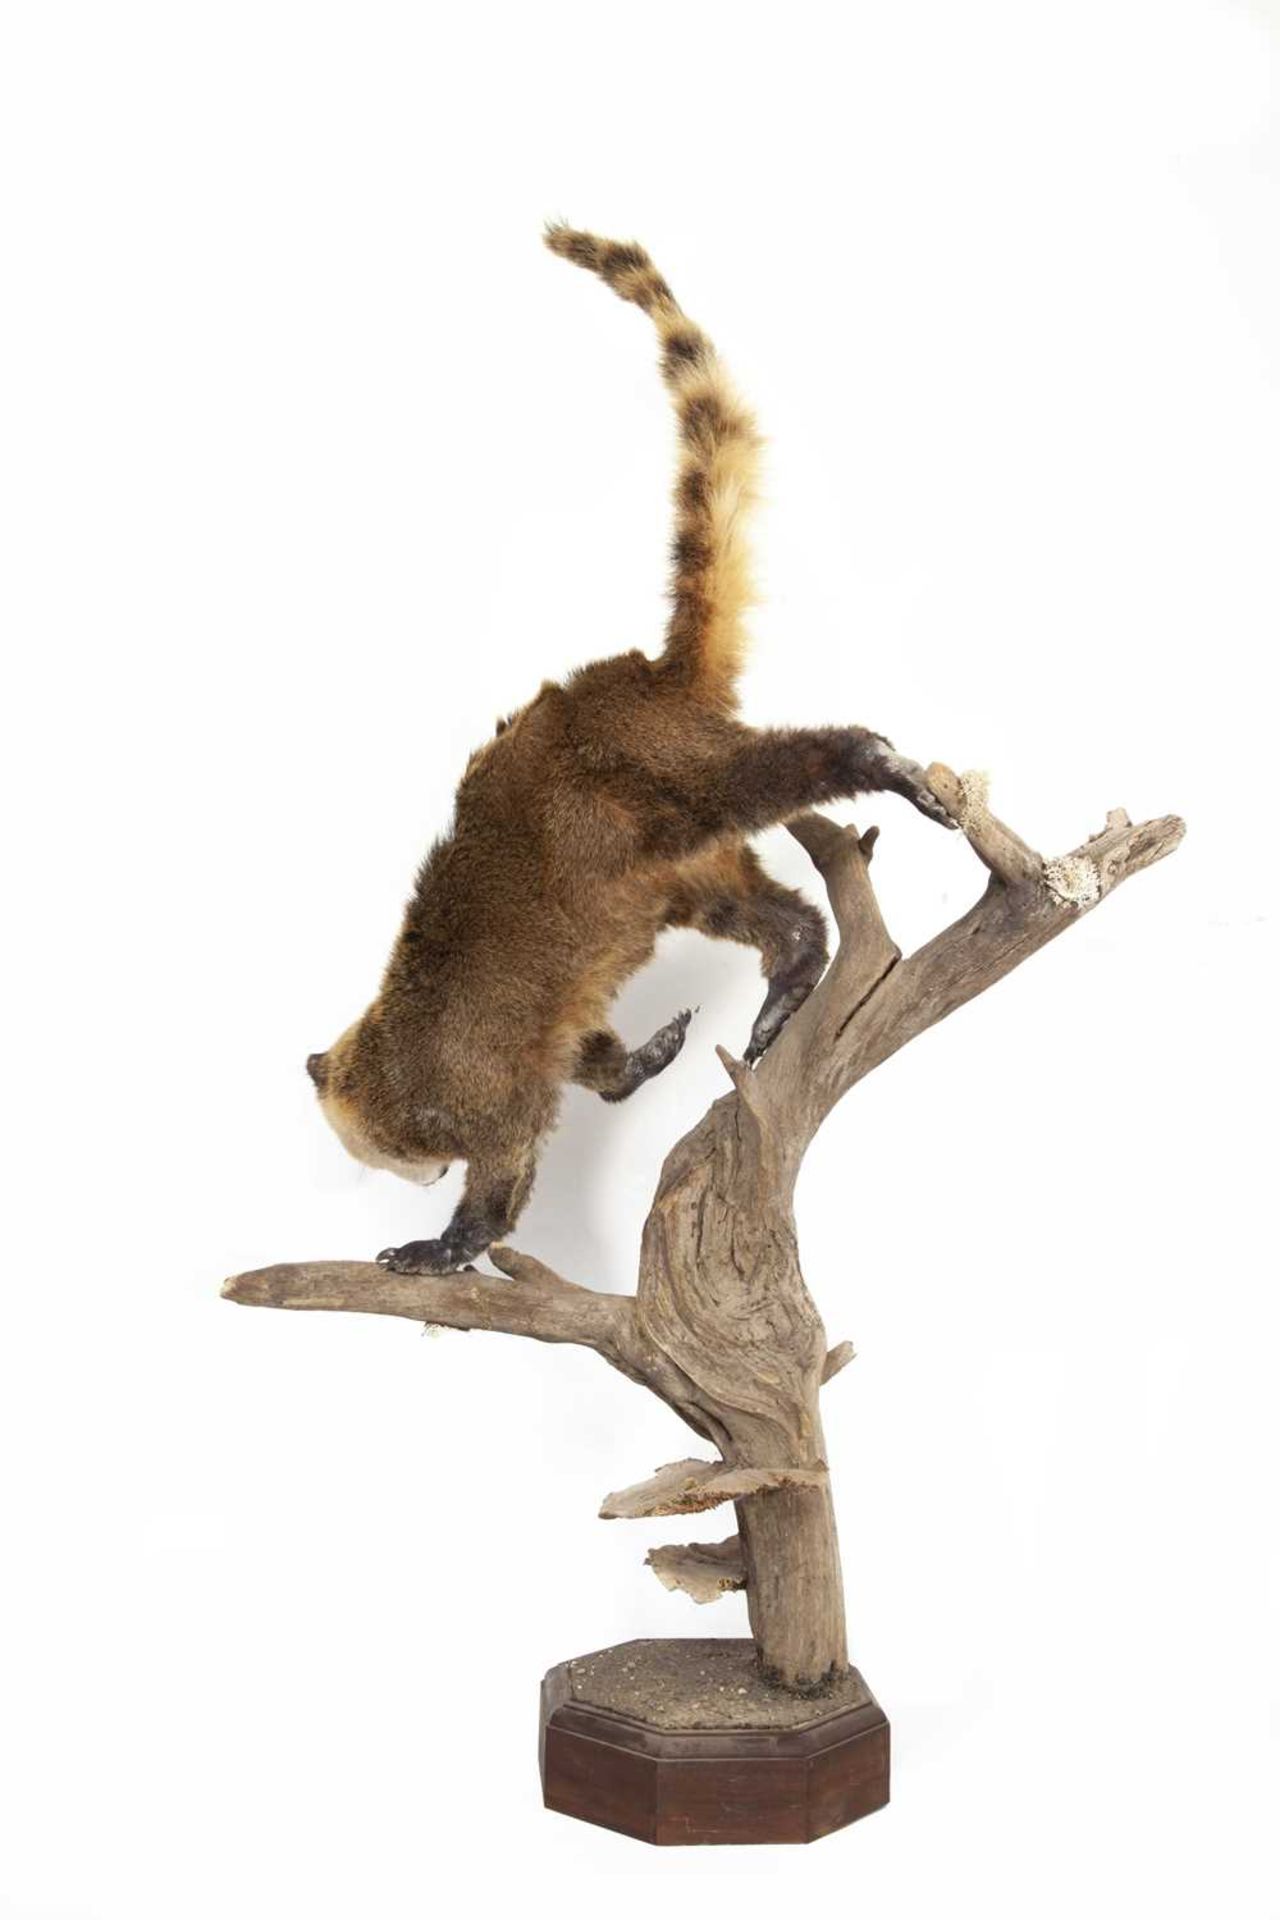 A TAXIDERMY FULL MOUNT STUDY OF A COATI - Image 3 of 3